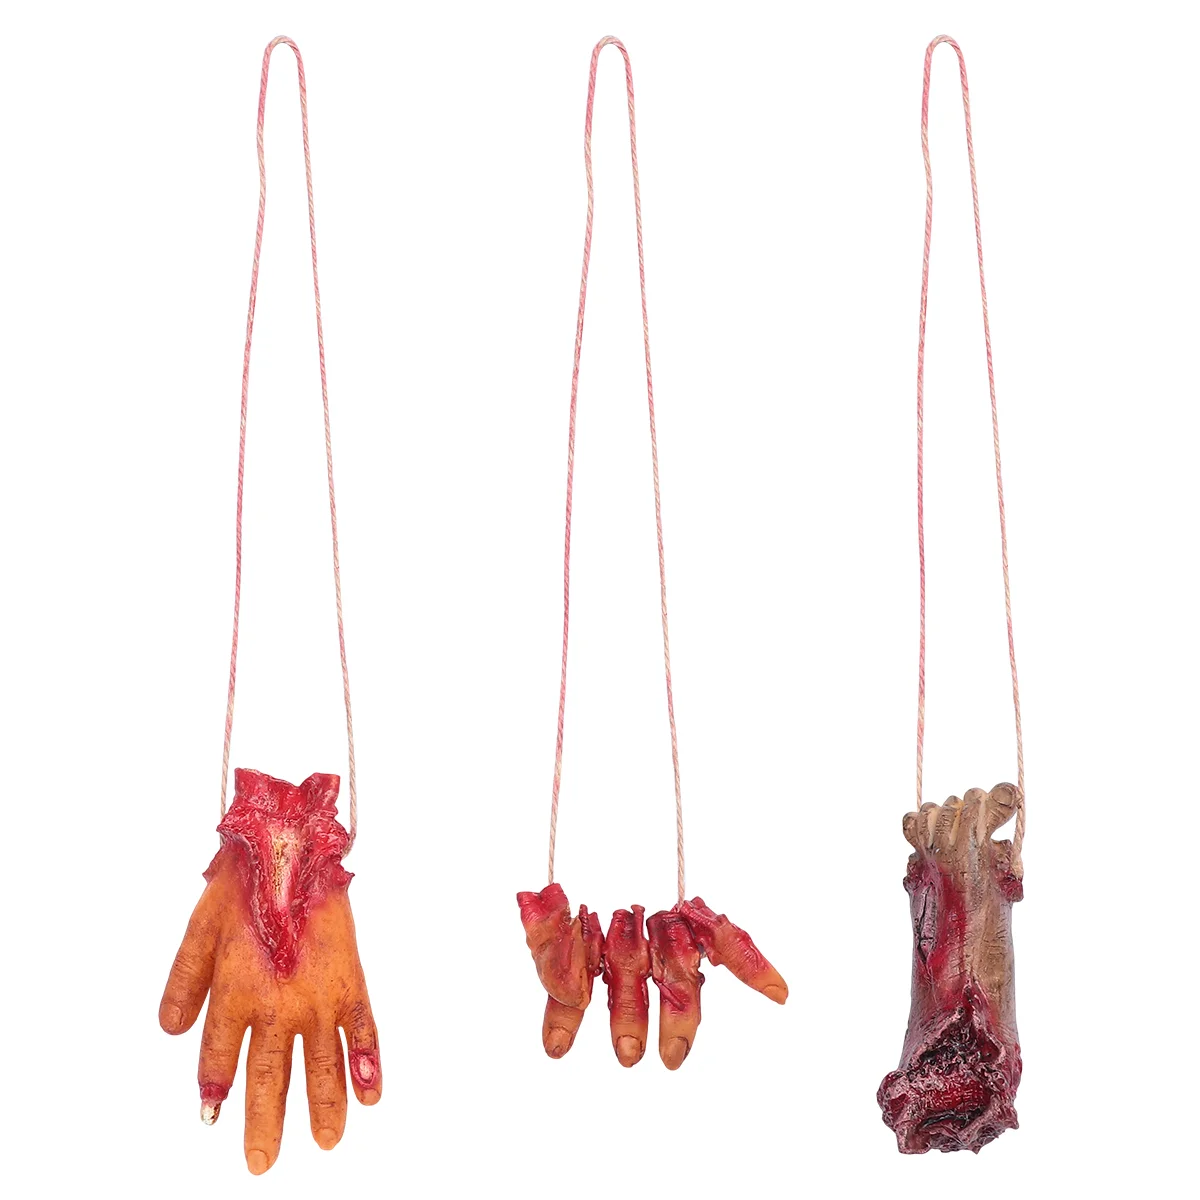 

3 Pcs Tricky Props Party Scary Hanging Broken Hand Halloween Horror Decoration Clothes Hanger Toy Pendant Pu Haunted House Toys